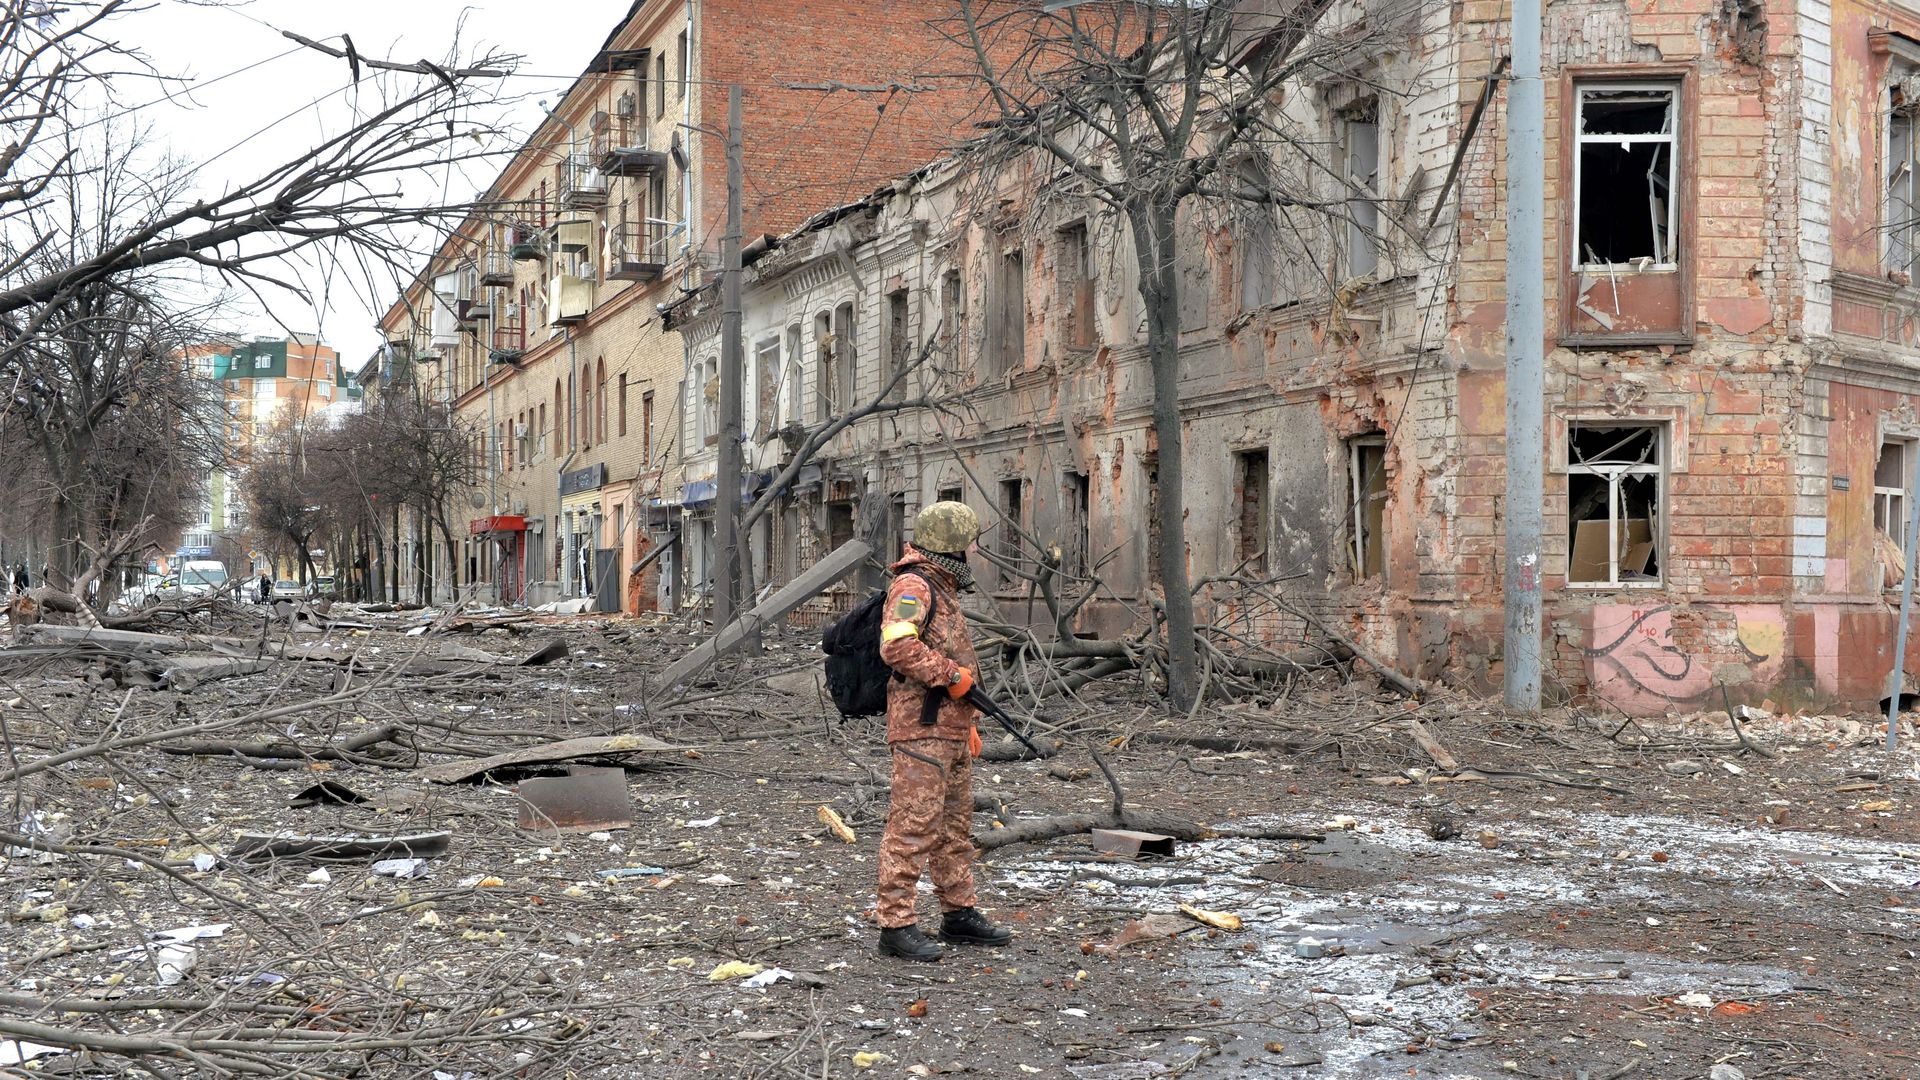 A member of the Ukrainian Territorial Defence Forces looks at destructions following a shelling in Ukraine's second-biggest city of Kharkiv on March 7, 2022